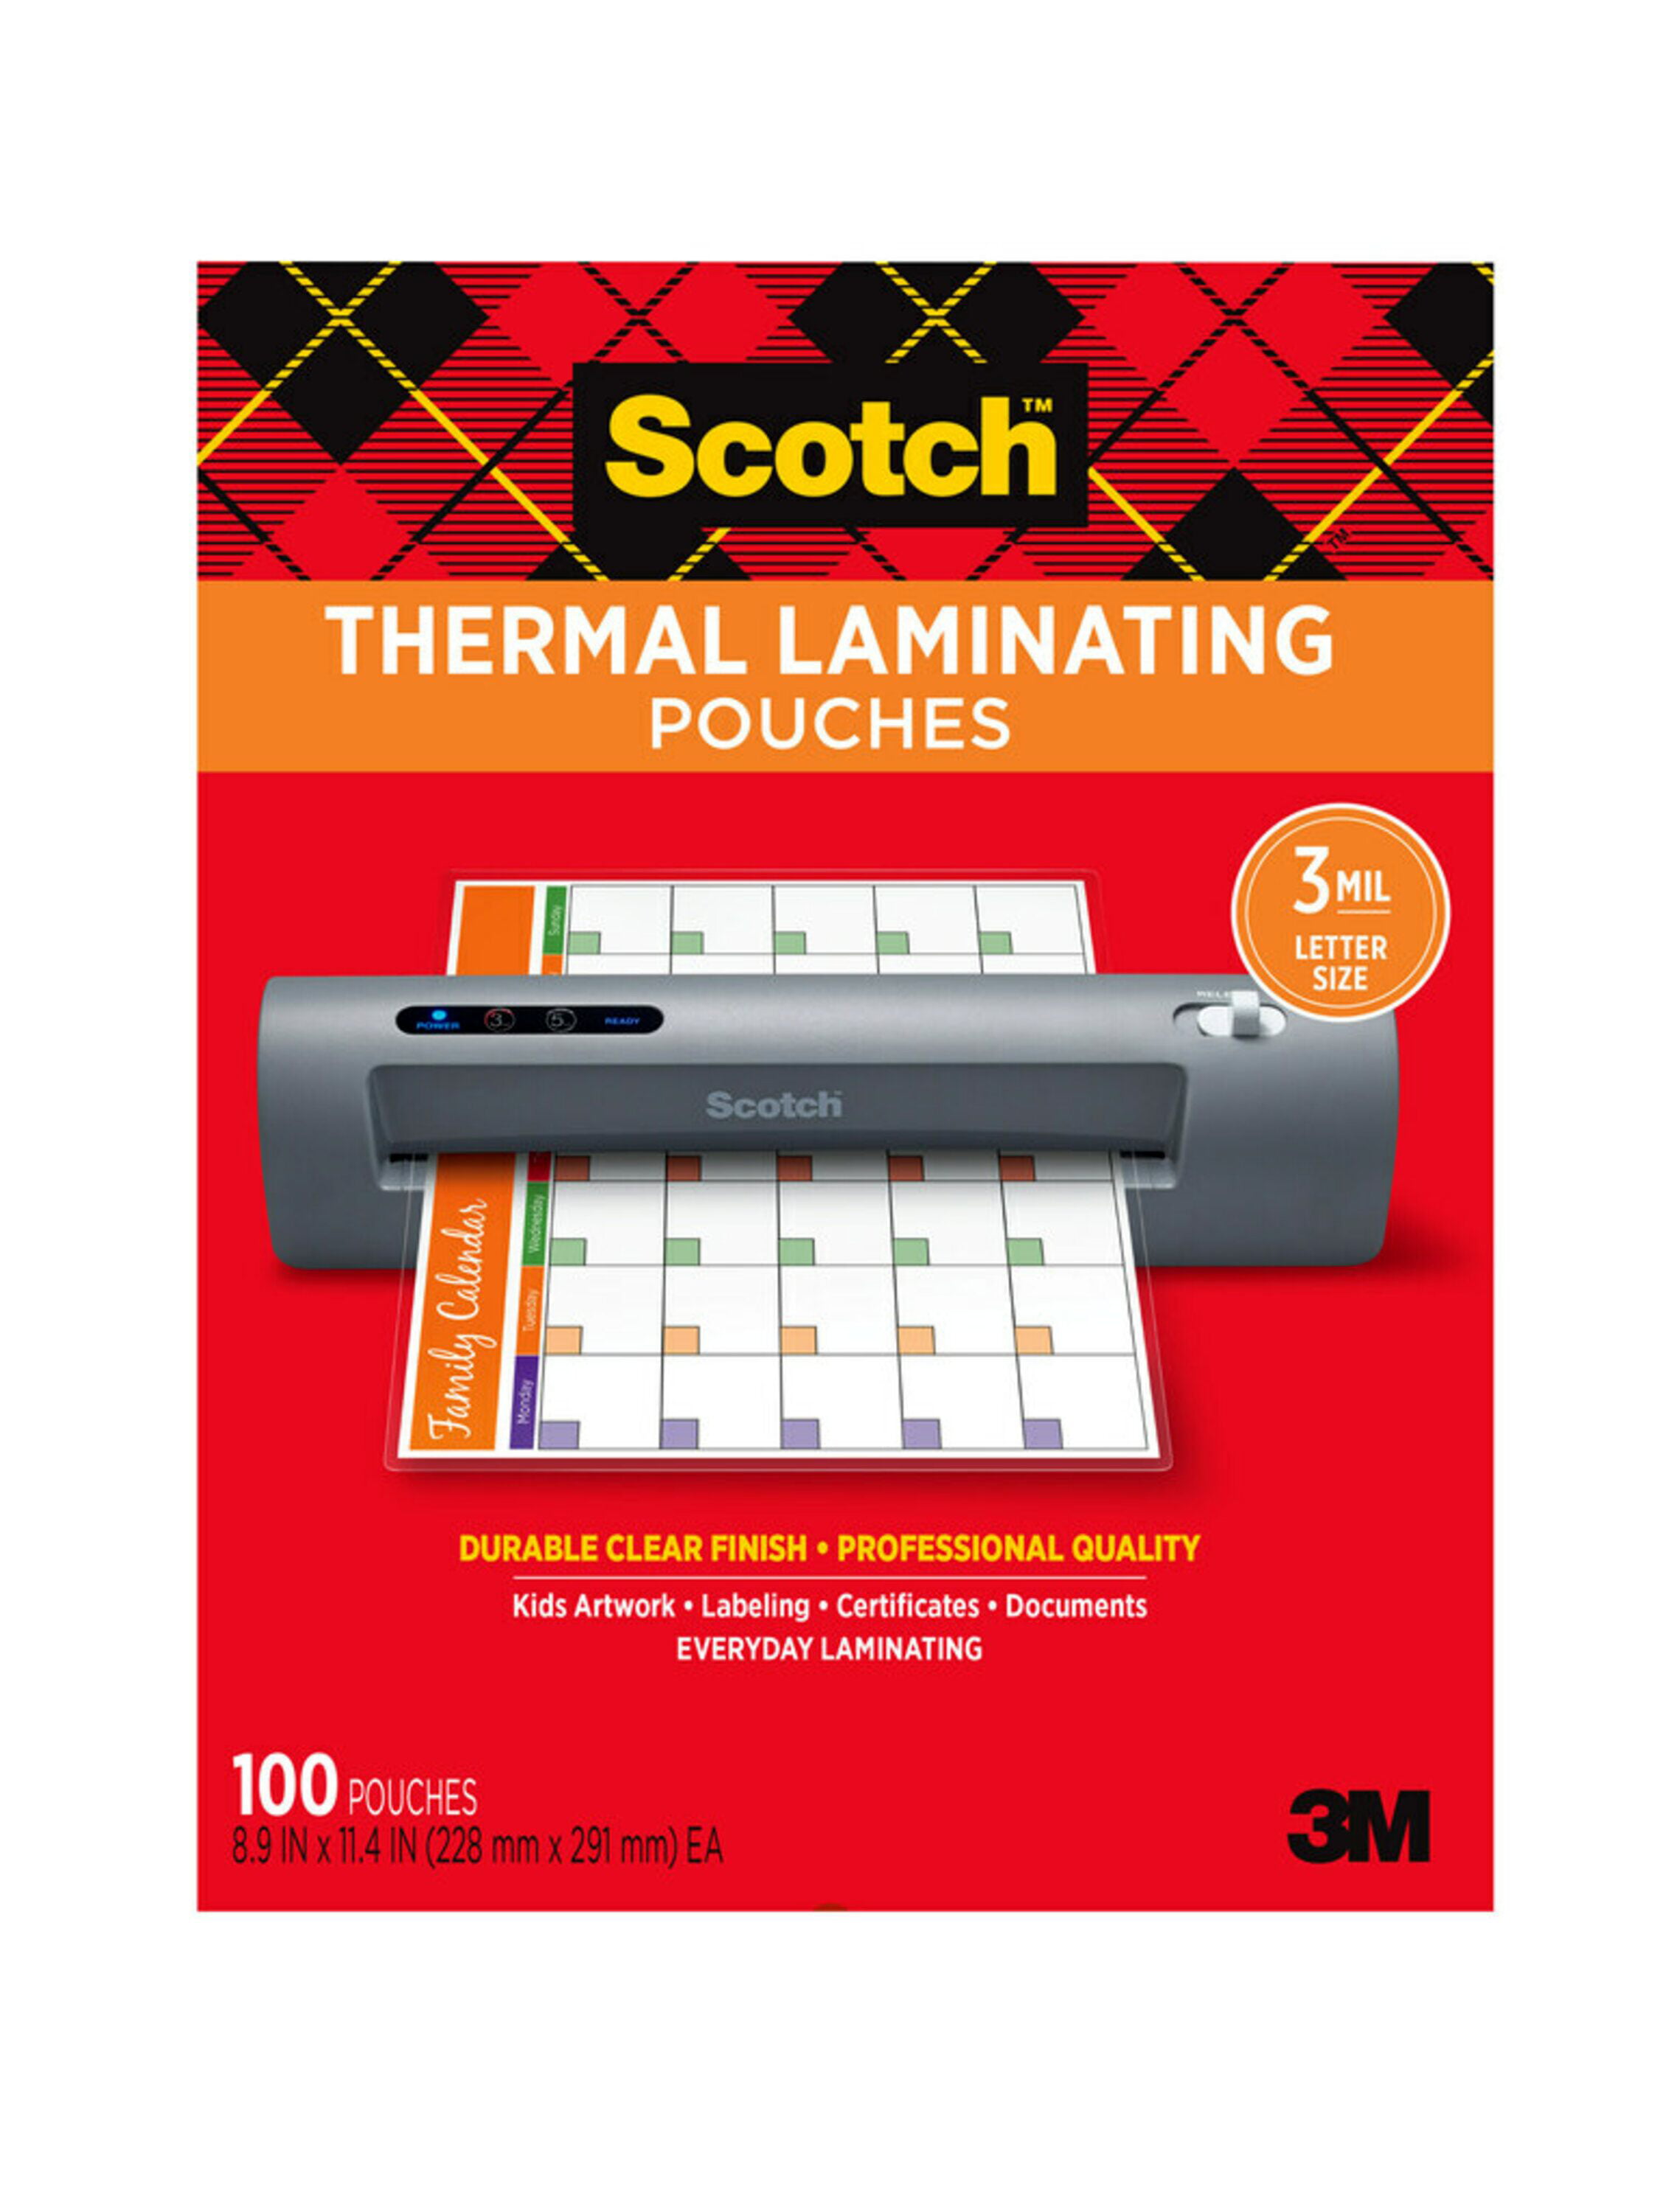 Best BL3 9x11.5 inch Letter Size Laminating Pouches 500 Pack for sale online 